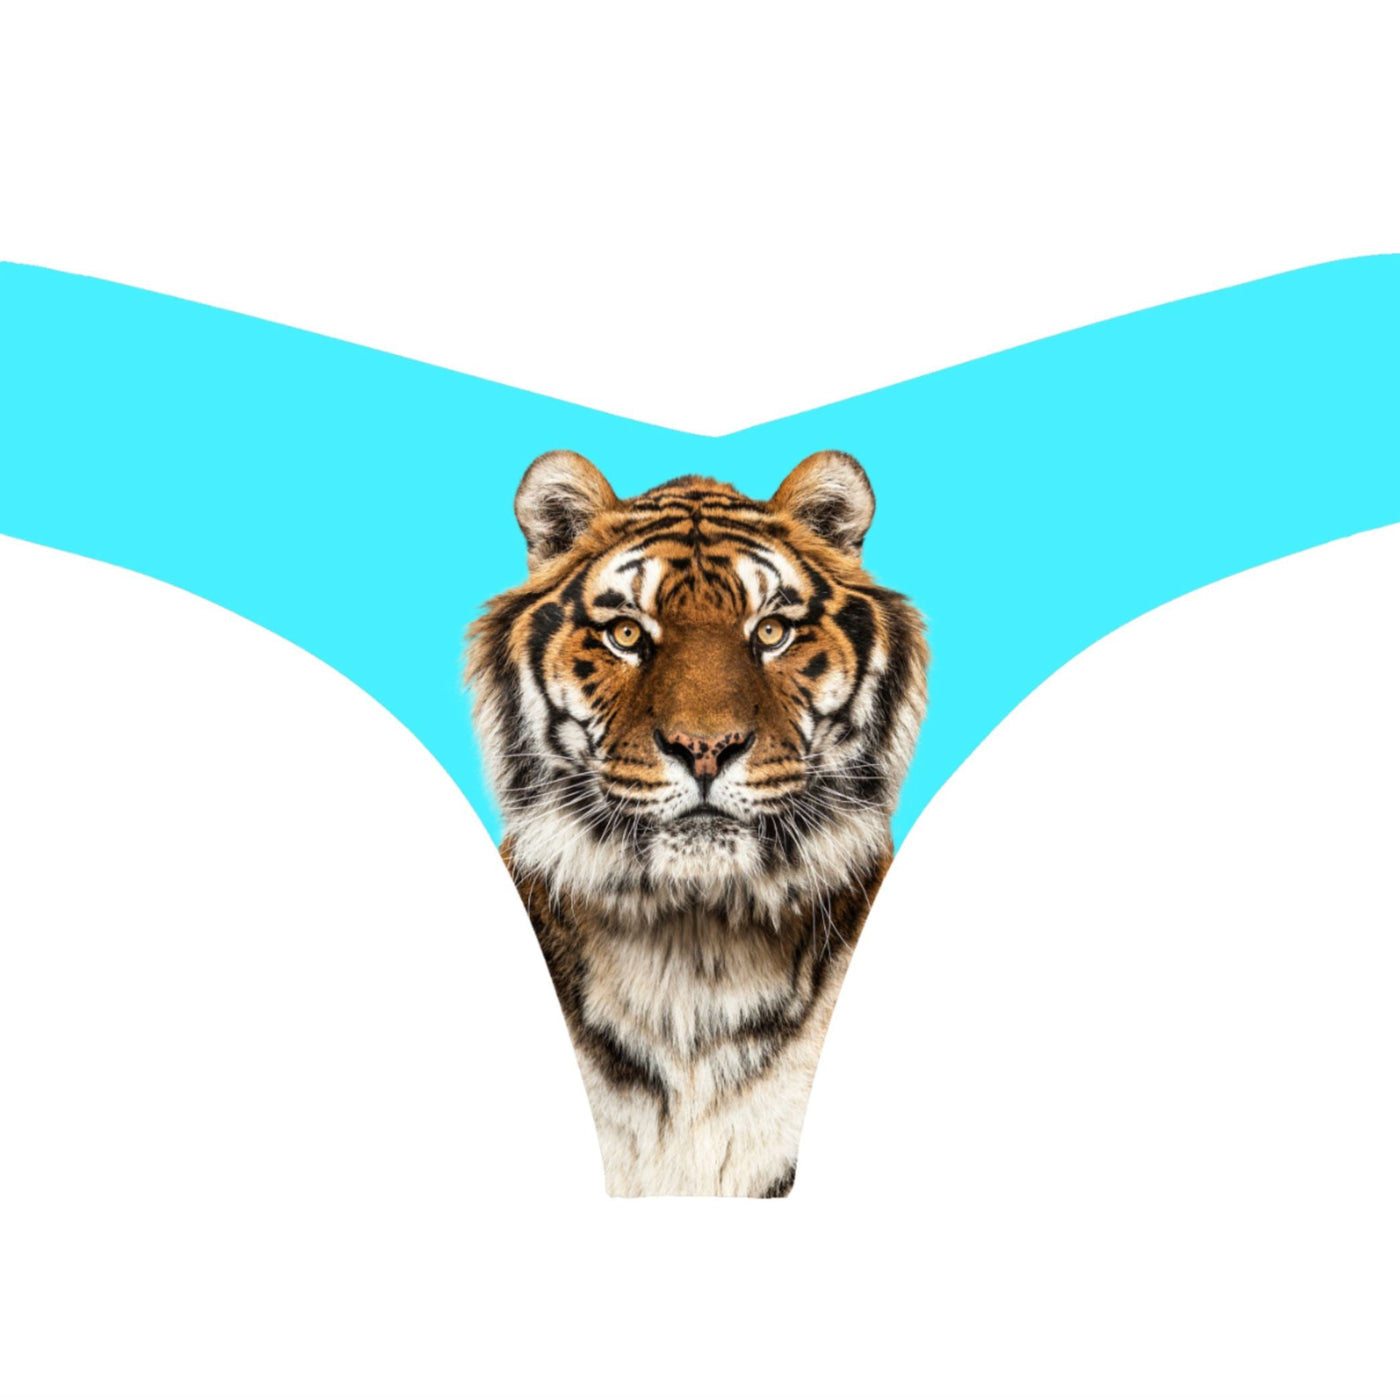 Commando Photo-Op Thongs in Blue Tiger CT18-Panties-Commando-Blue Tiger-Small/Medium-Anna Bella Fine Lingerie, Reveal Your Most Gorgeous Self!